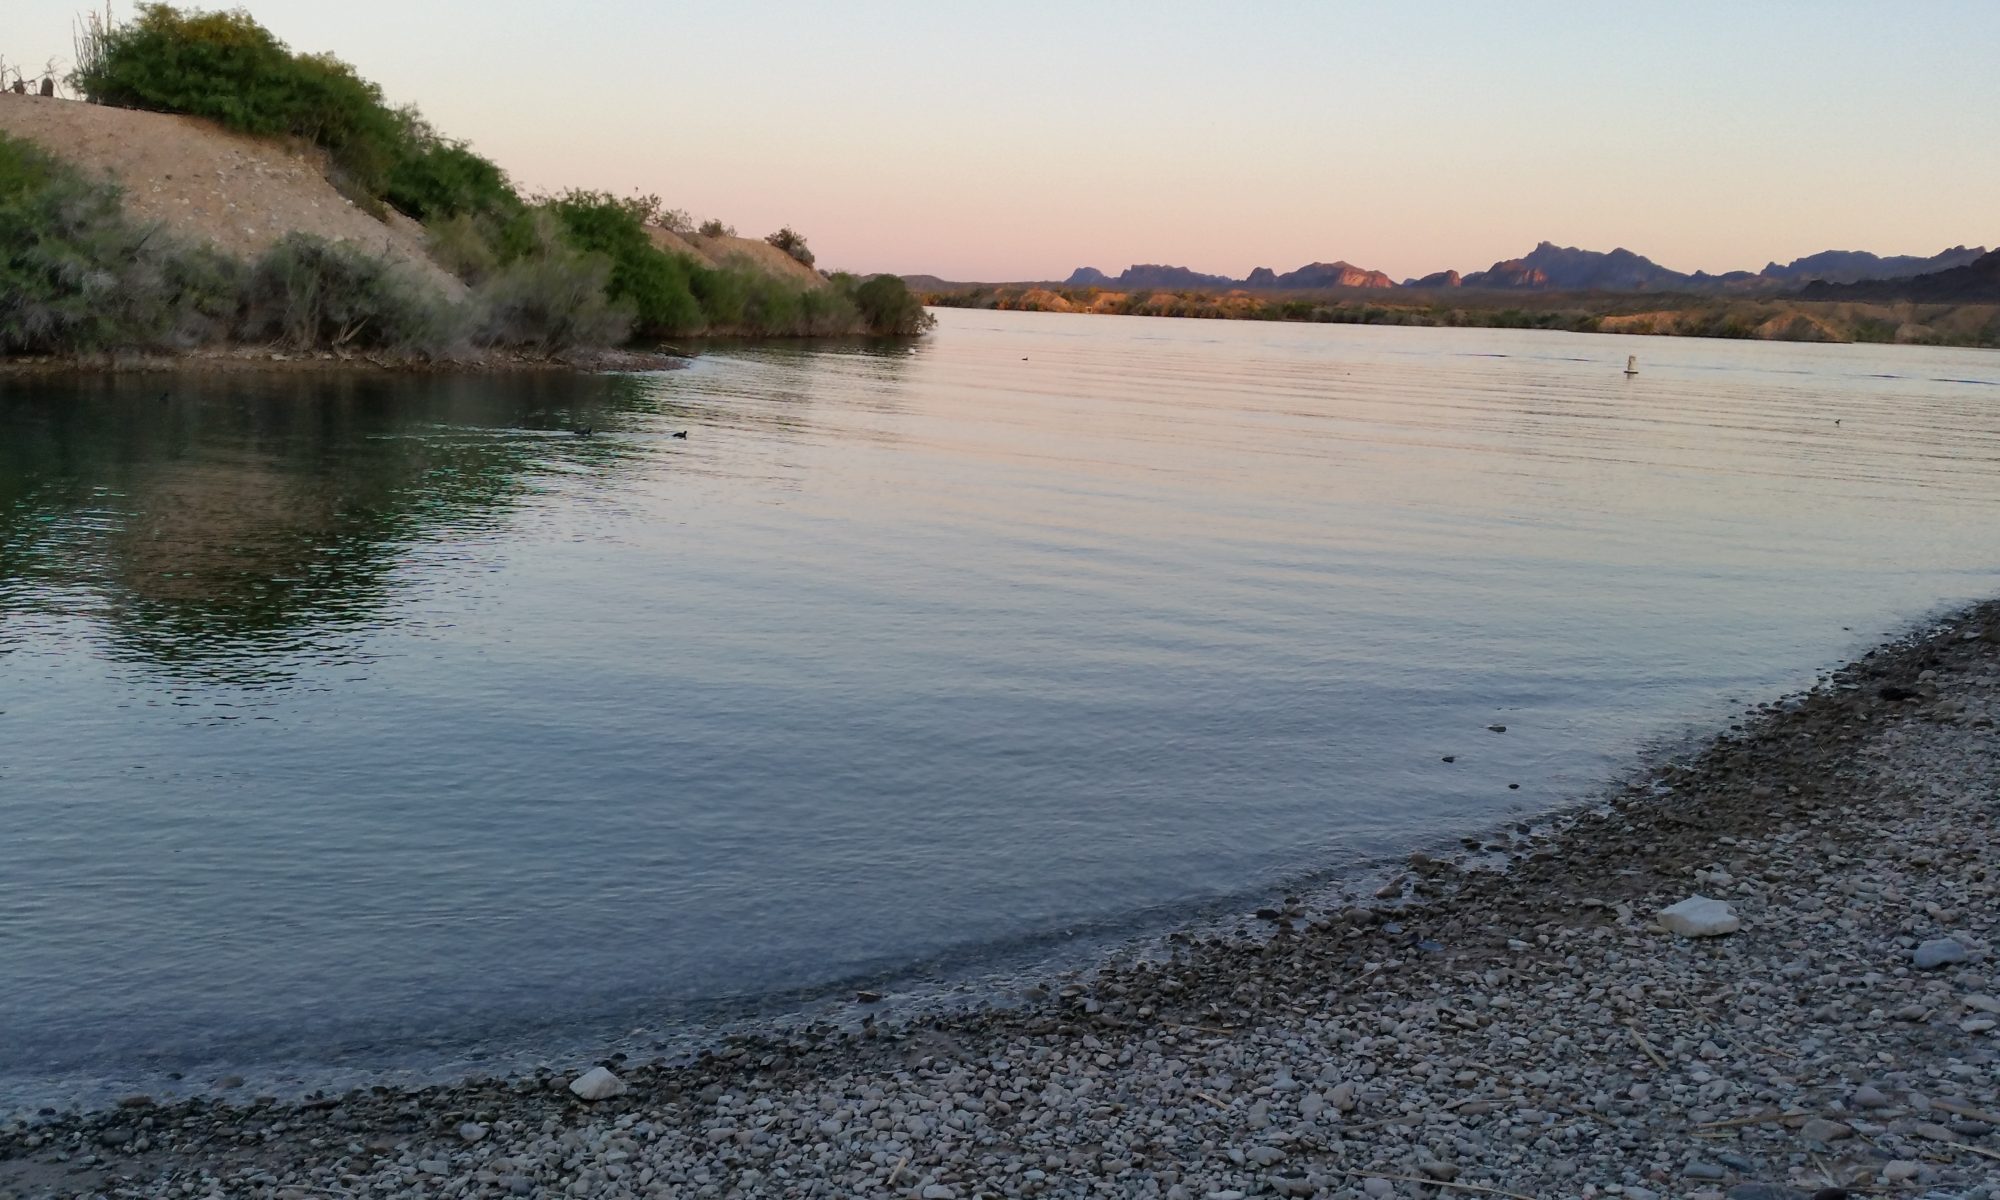 Water view of our cove in Lake Havasu